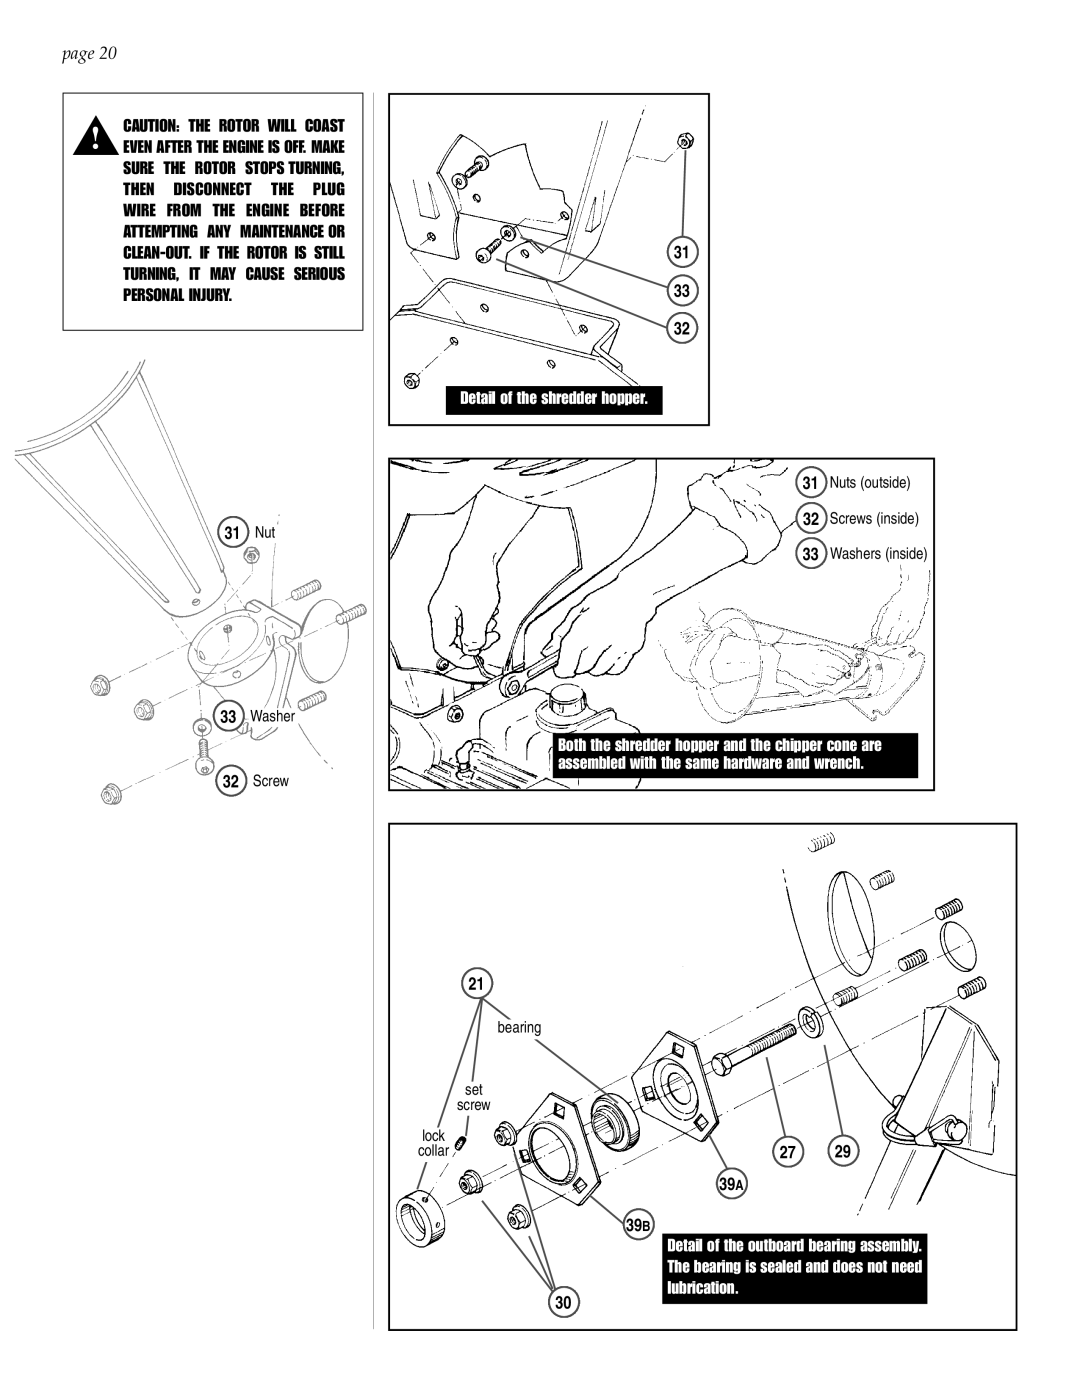 Patriot Products 10F-CSV manual 31 Nut, Detail of the shredder hopper, 39A 39B, Personal Injury 